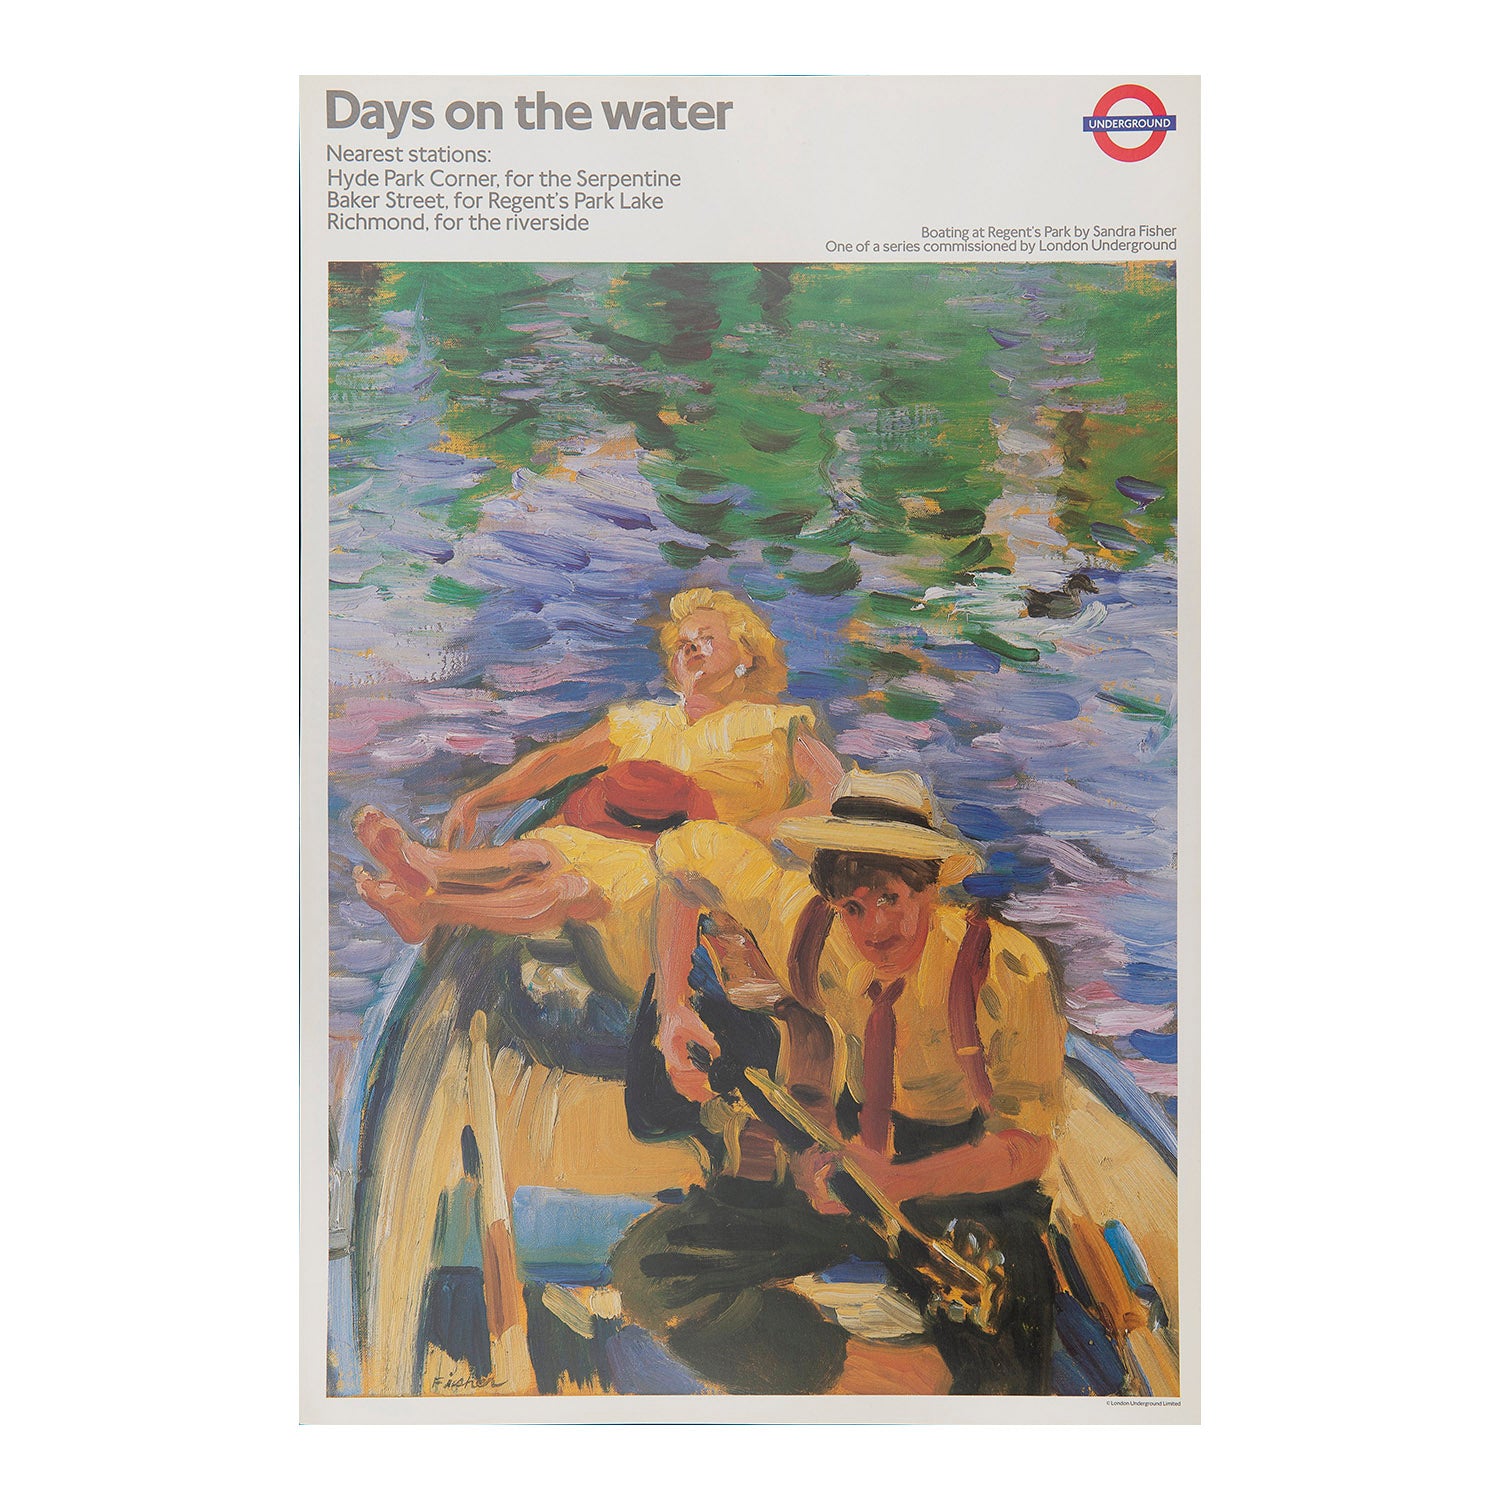 original London Transport poster, <em>Days on the Water</em>, by Sandra Fisher, 1989. Commissioned as part of the ‘Art on the Underground’ programme, Fisher’s languid depiction of a young couple boating at Regent’s Park was one London Underground’s most popular posters of the time, even appearing on the front cover of Reader's Digest magazine